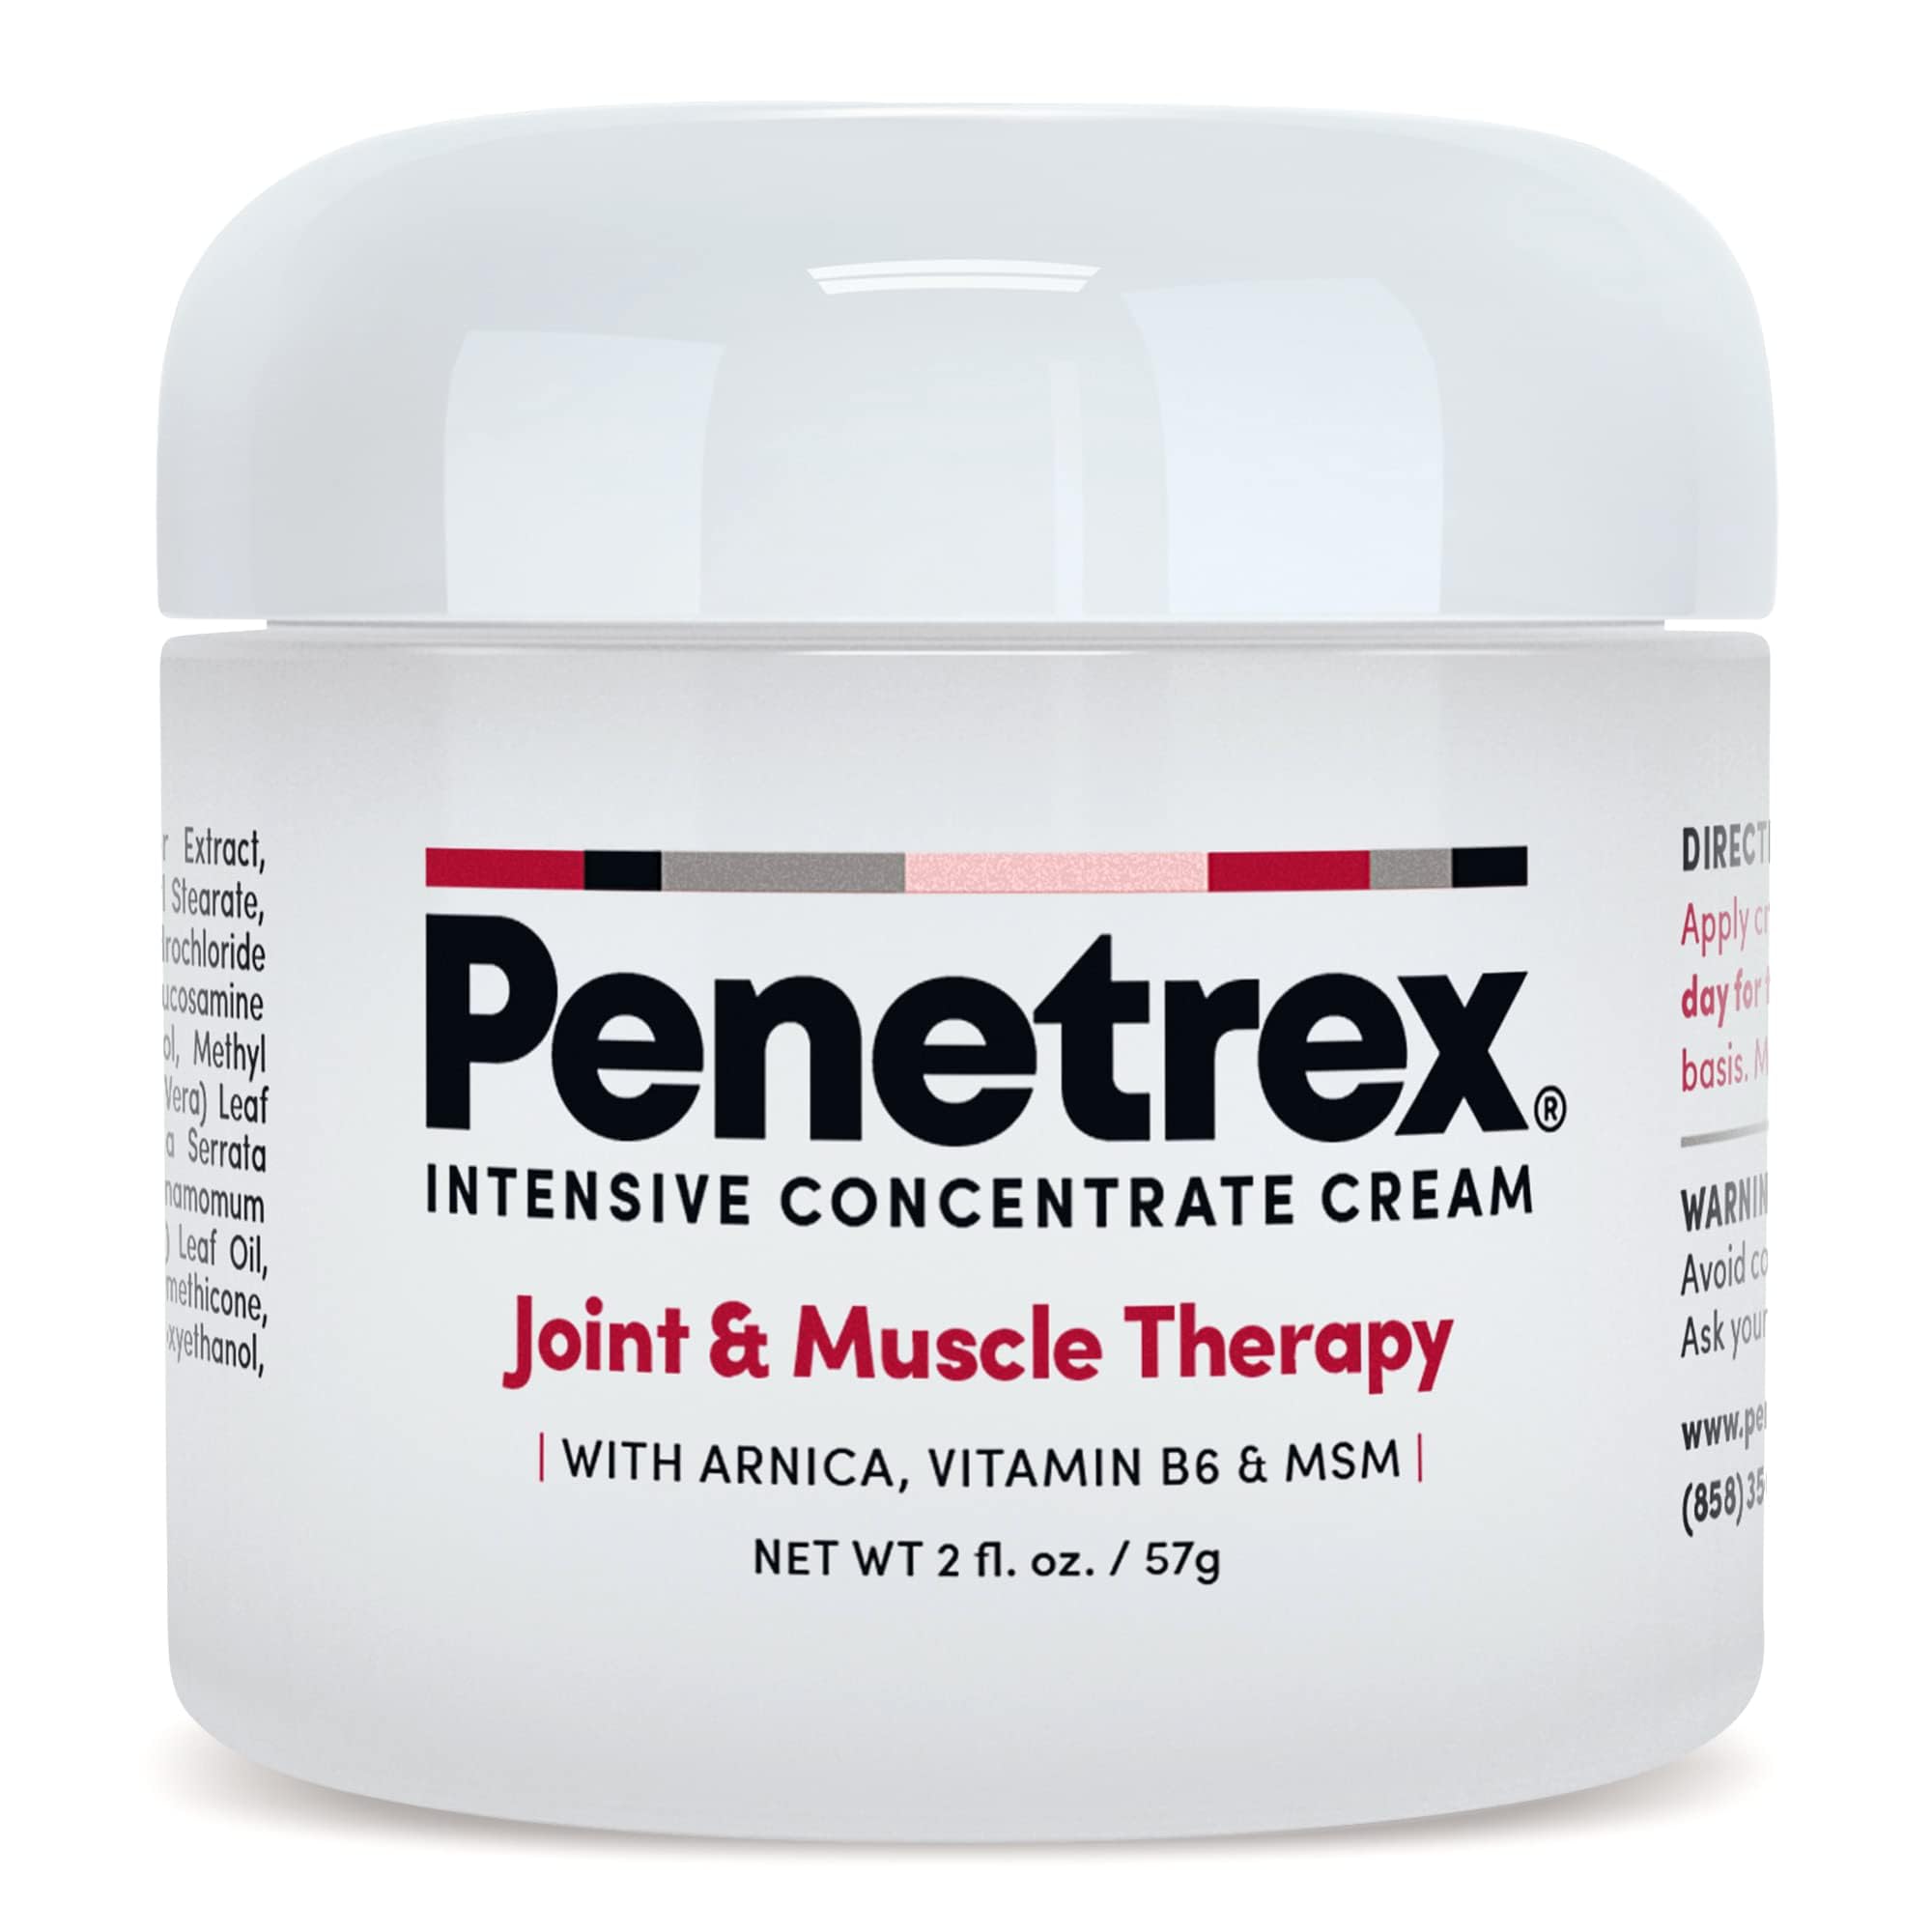 Penetrex Joint & Muscle Therapy – 2oz Cream – Intensive Concentrate Rub for Joint and Muscle Recovery, Premium Formula with Arnica, Vitamin B6 and MSM Provides Relief for Back, Neck, Hands, Feet